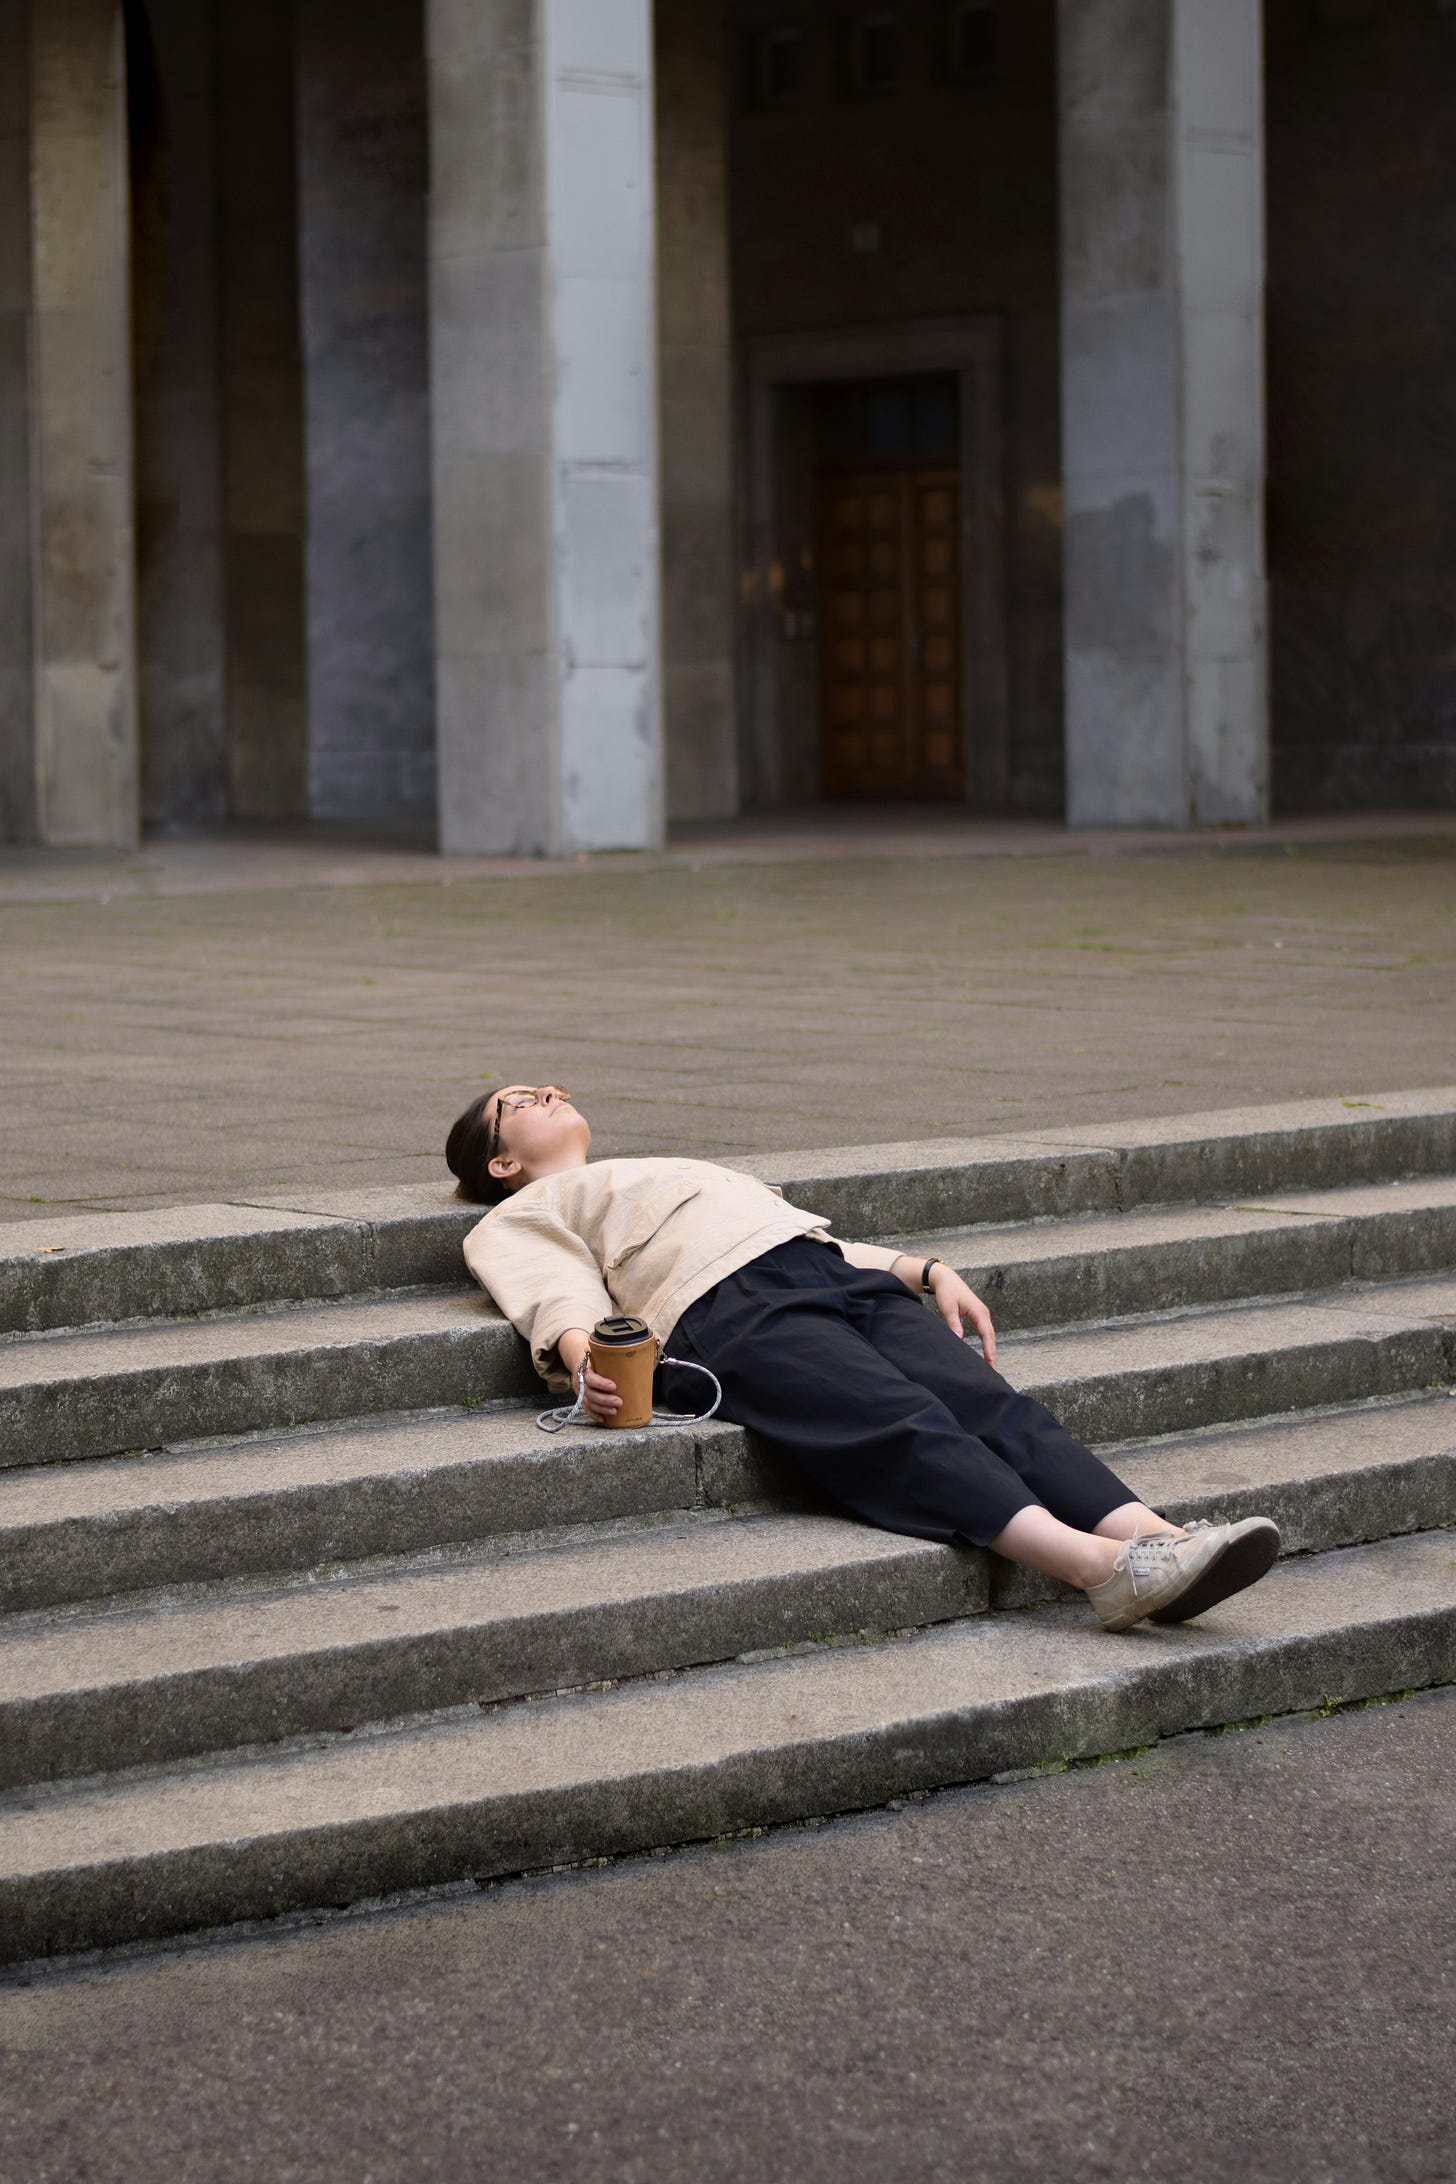 A person lying down on their back on some steps. They have their eye closed and they look exhausted.